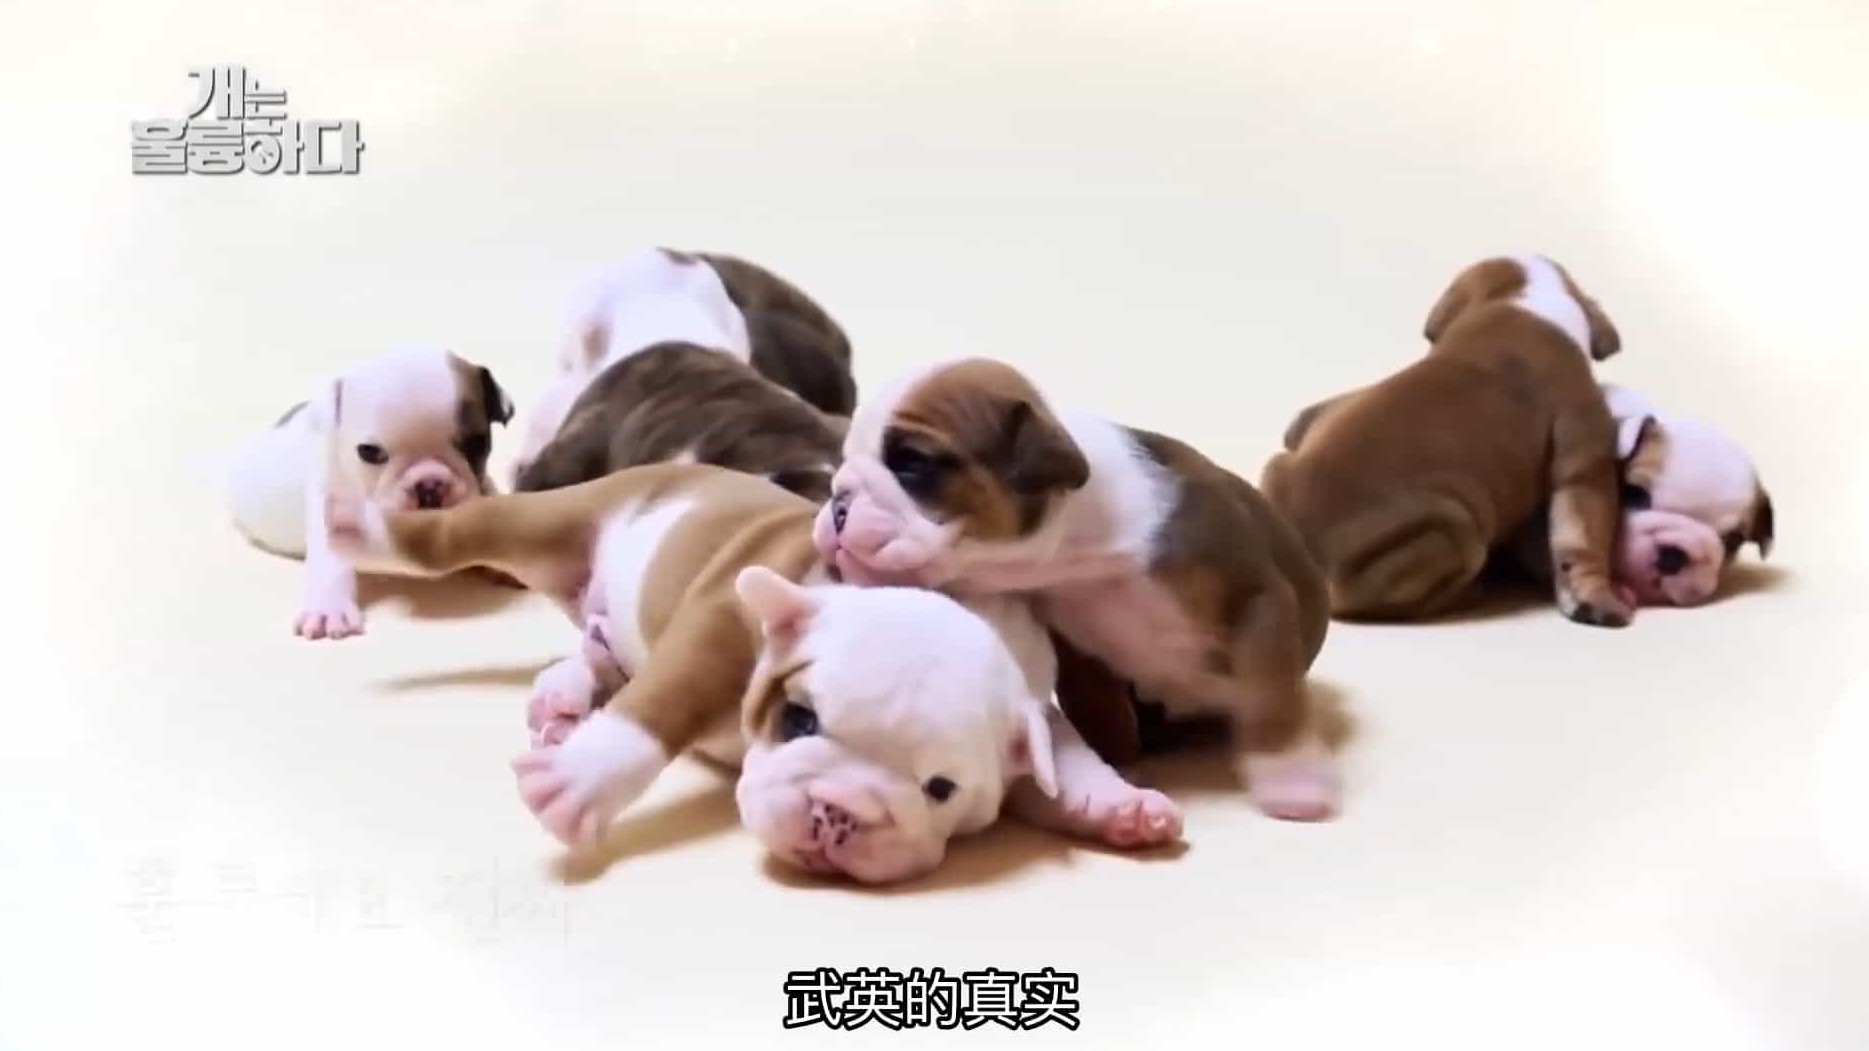 KBS纪录片《狗狗很优秀 Dogs are Incredible》全91集 韩语中字 720P高清网盘下载